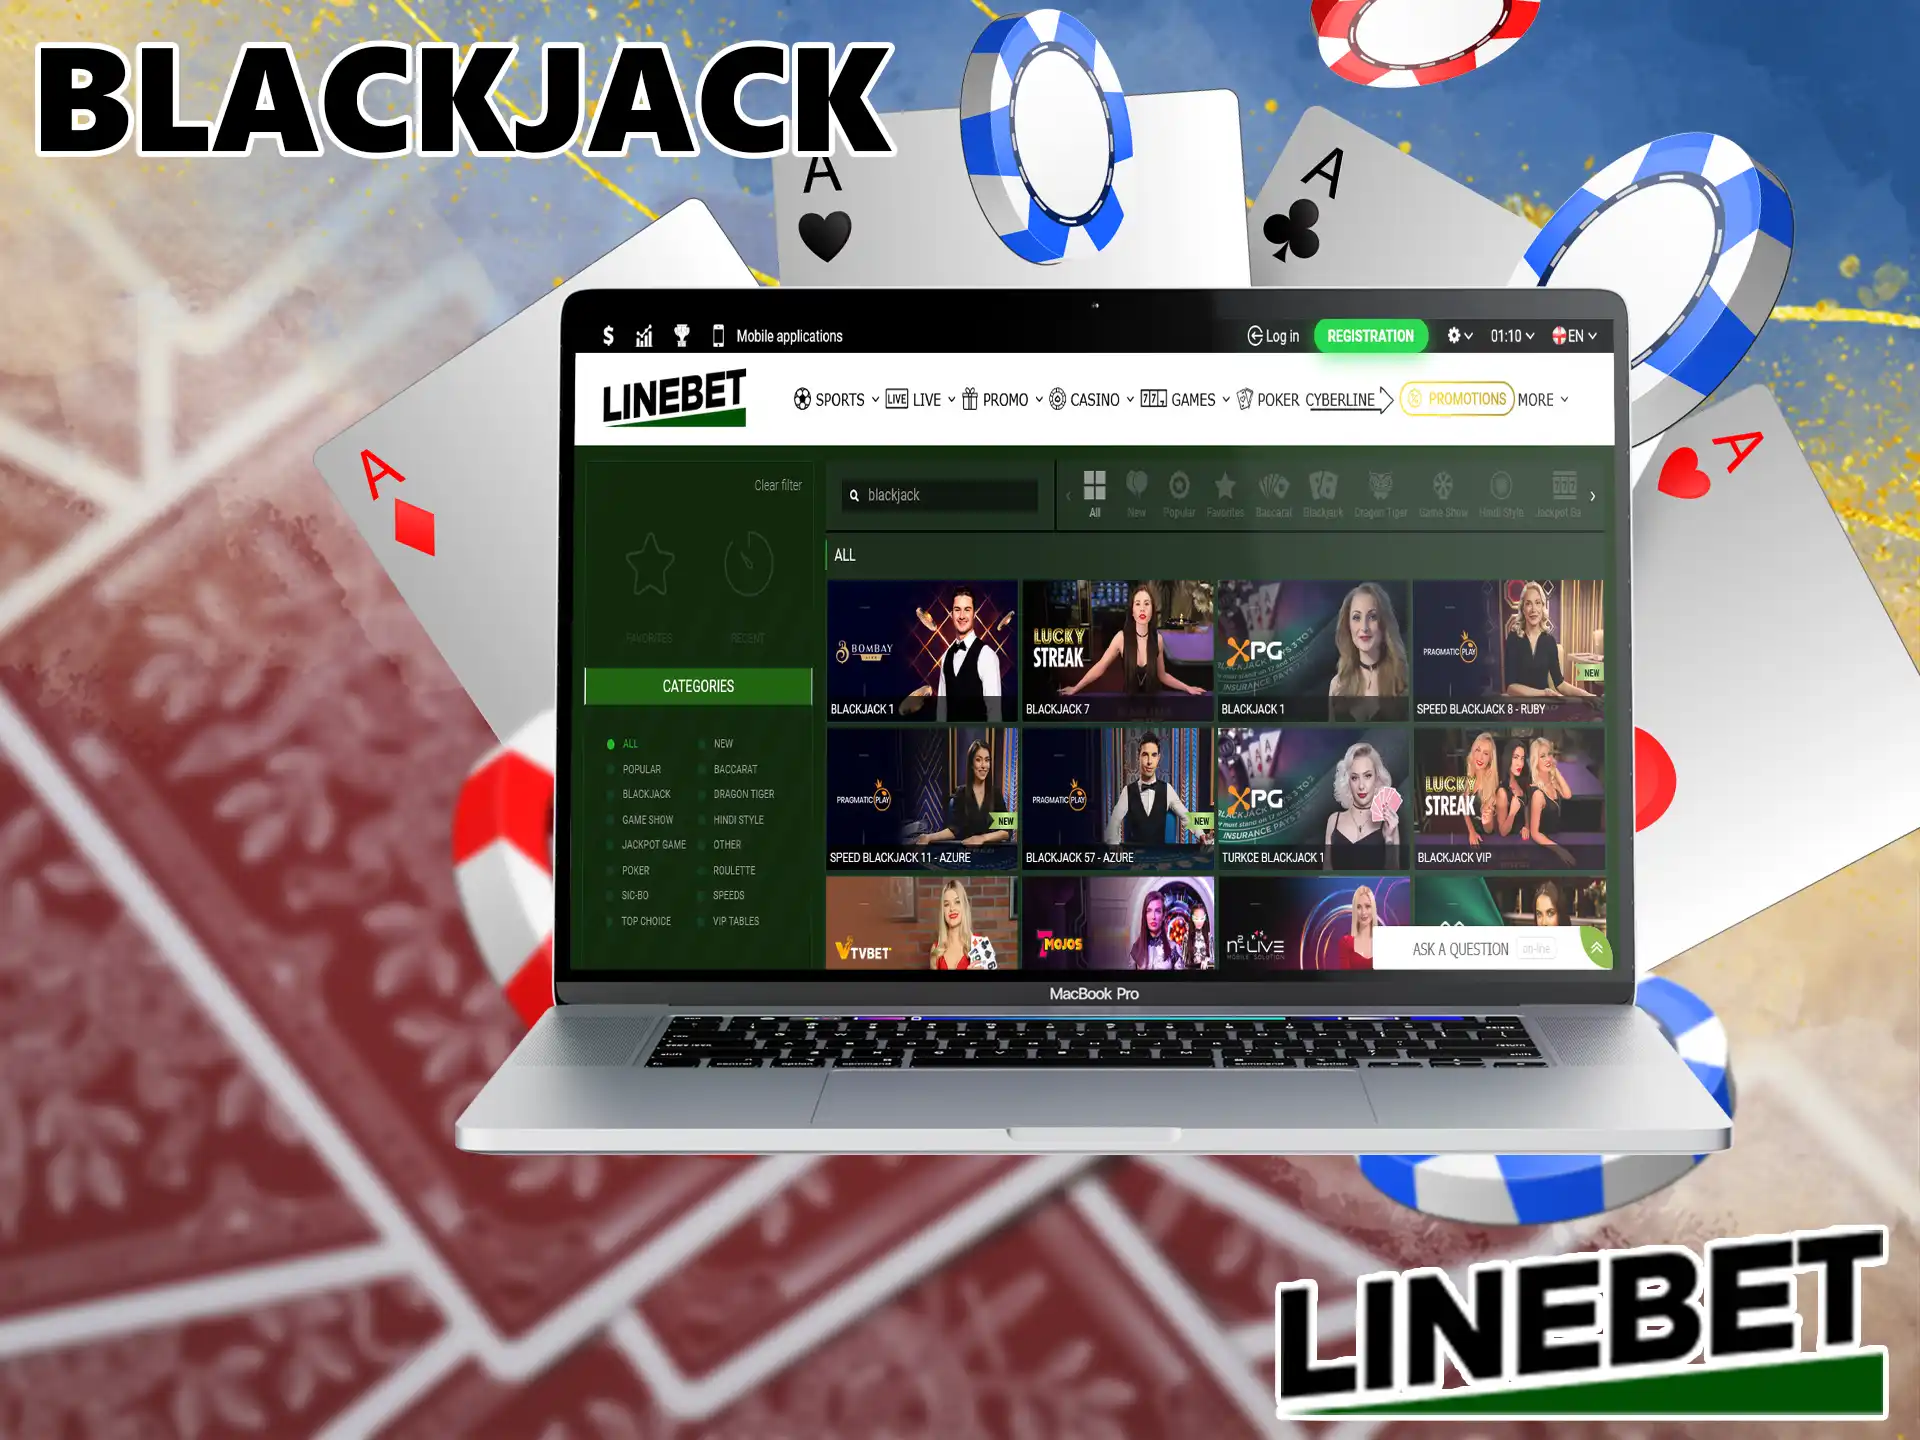 Play the very popular gambling game at Linebet Casino, you have to get no more than 21 points to win.